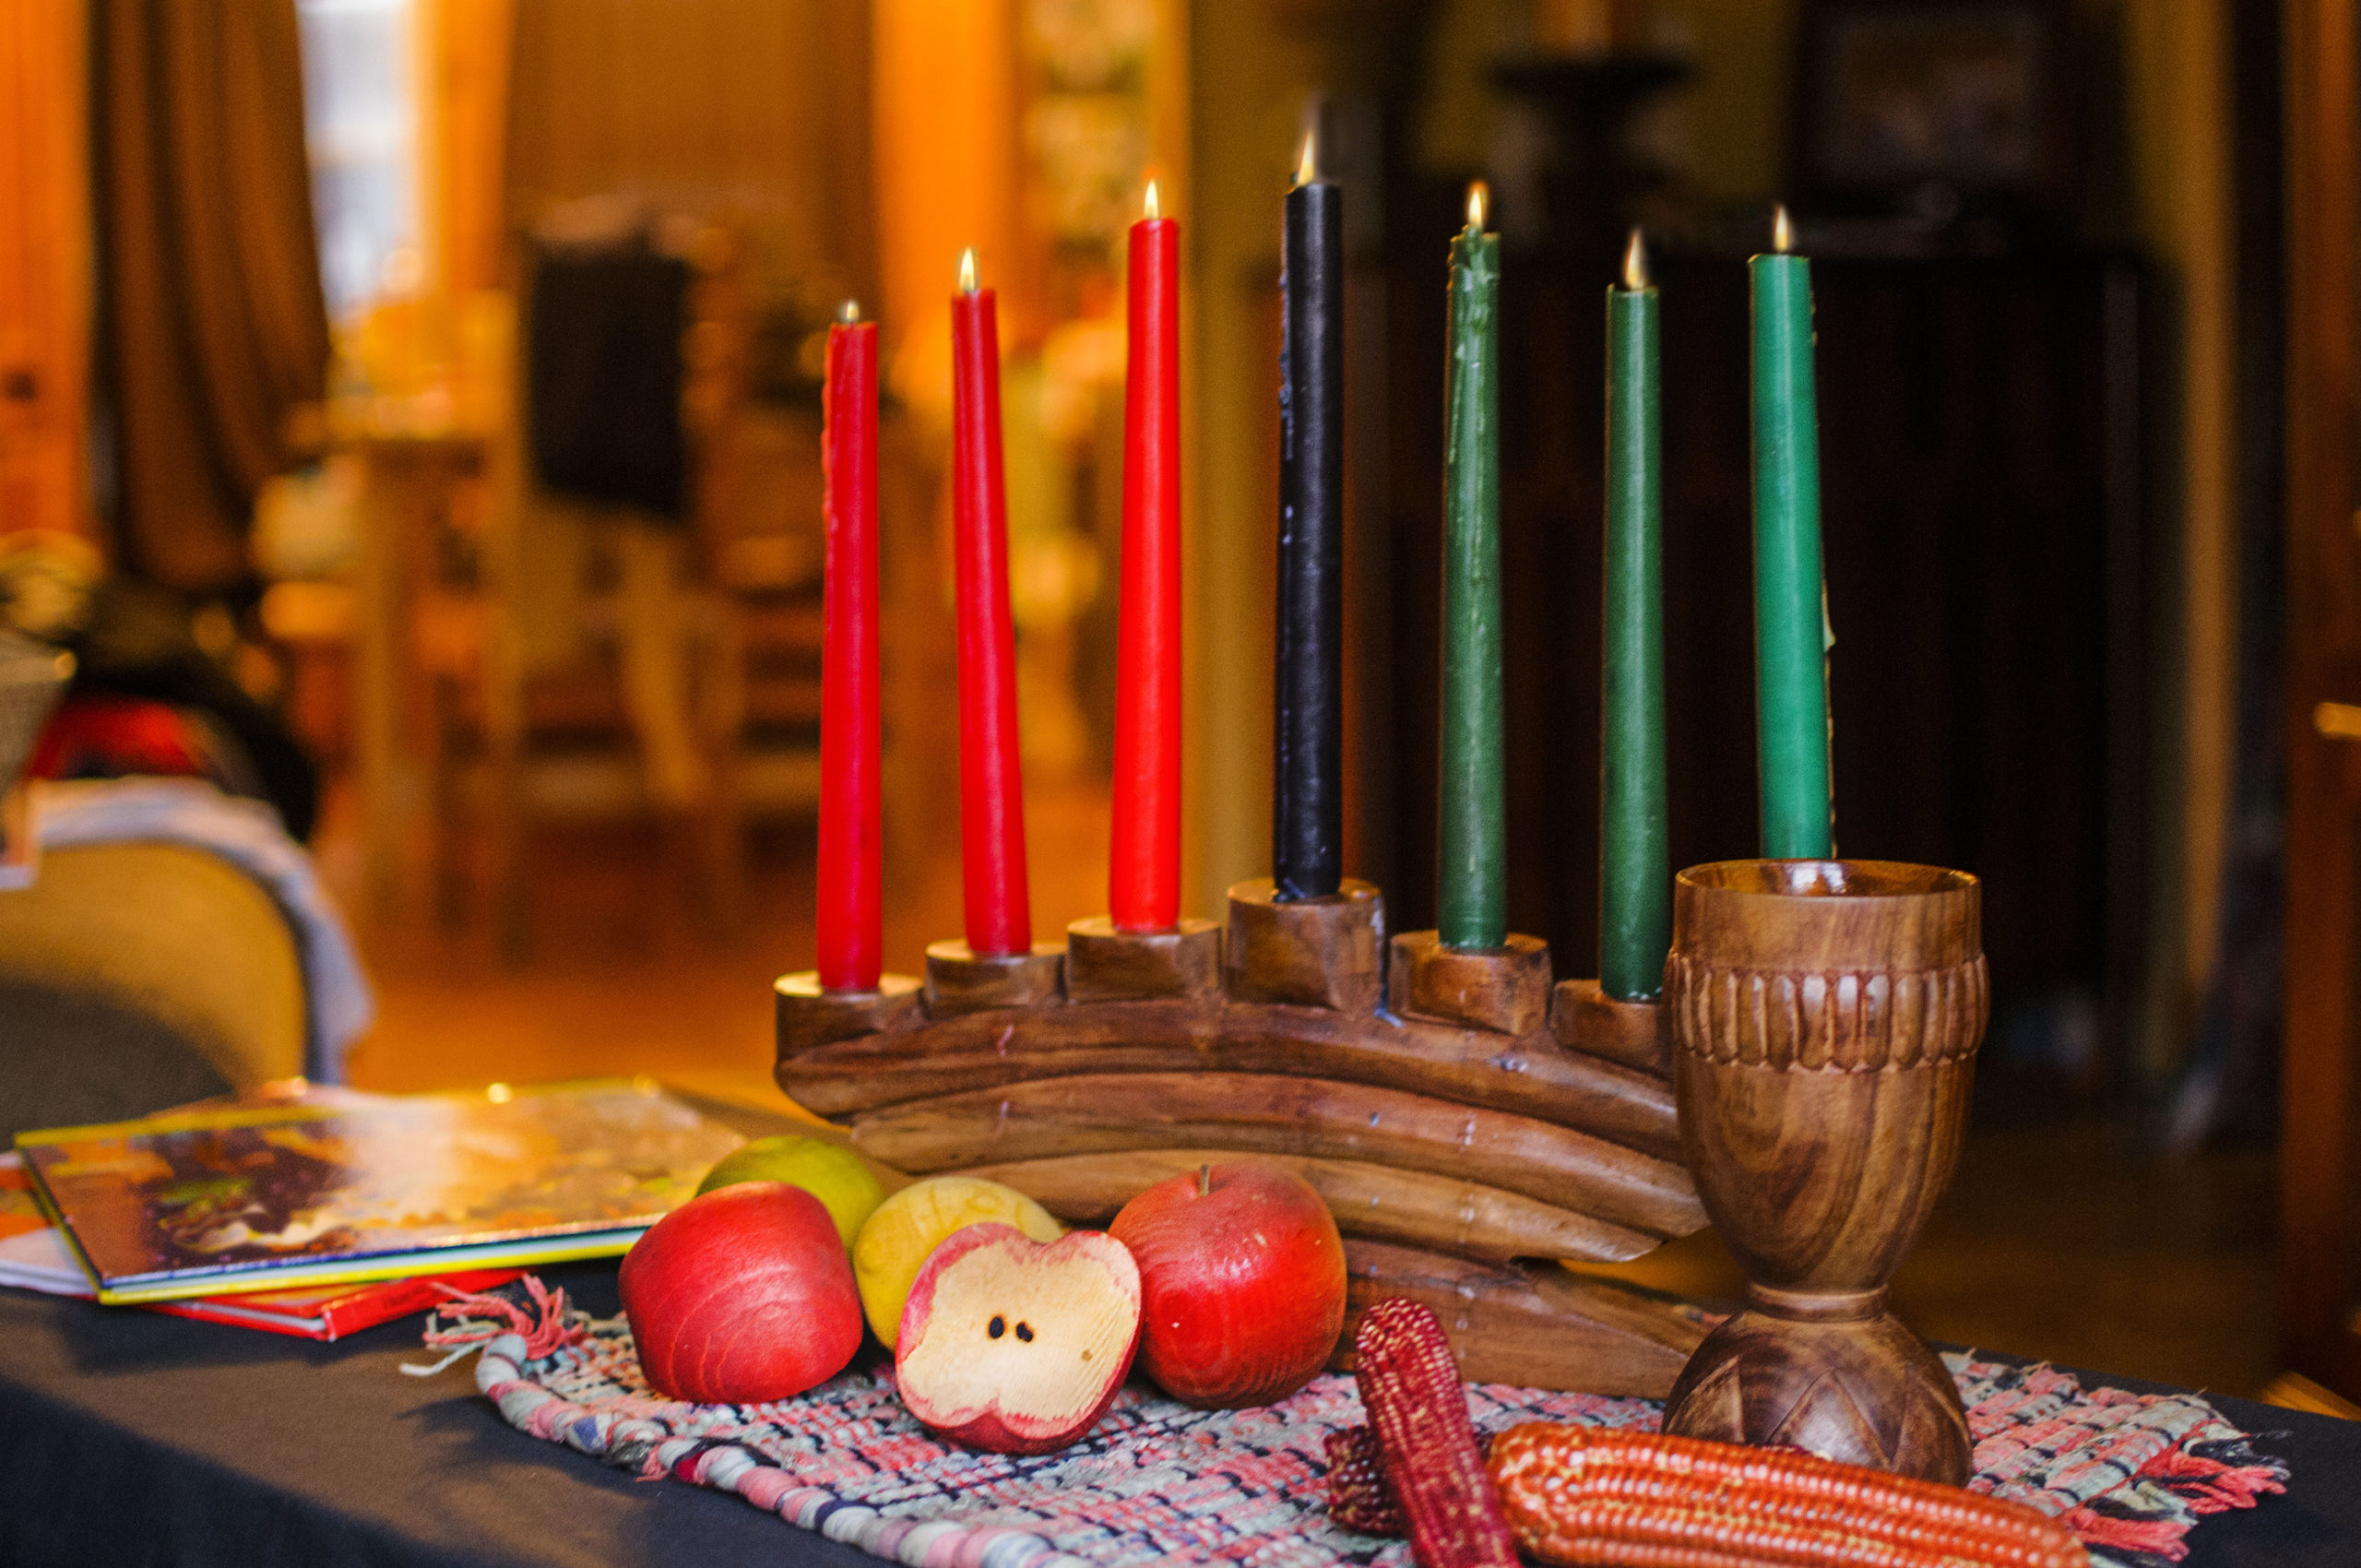 A photo of a table decorated for Kwanzaa. There is a kinara with seven unlit candles, with apples sitting in front.